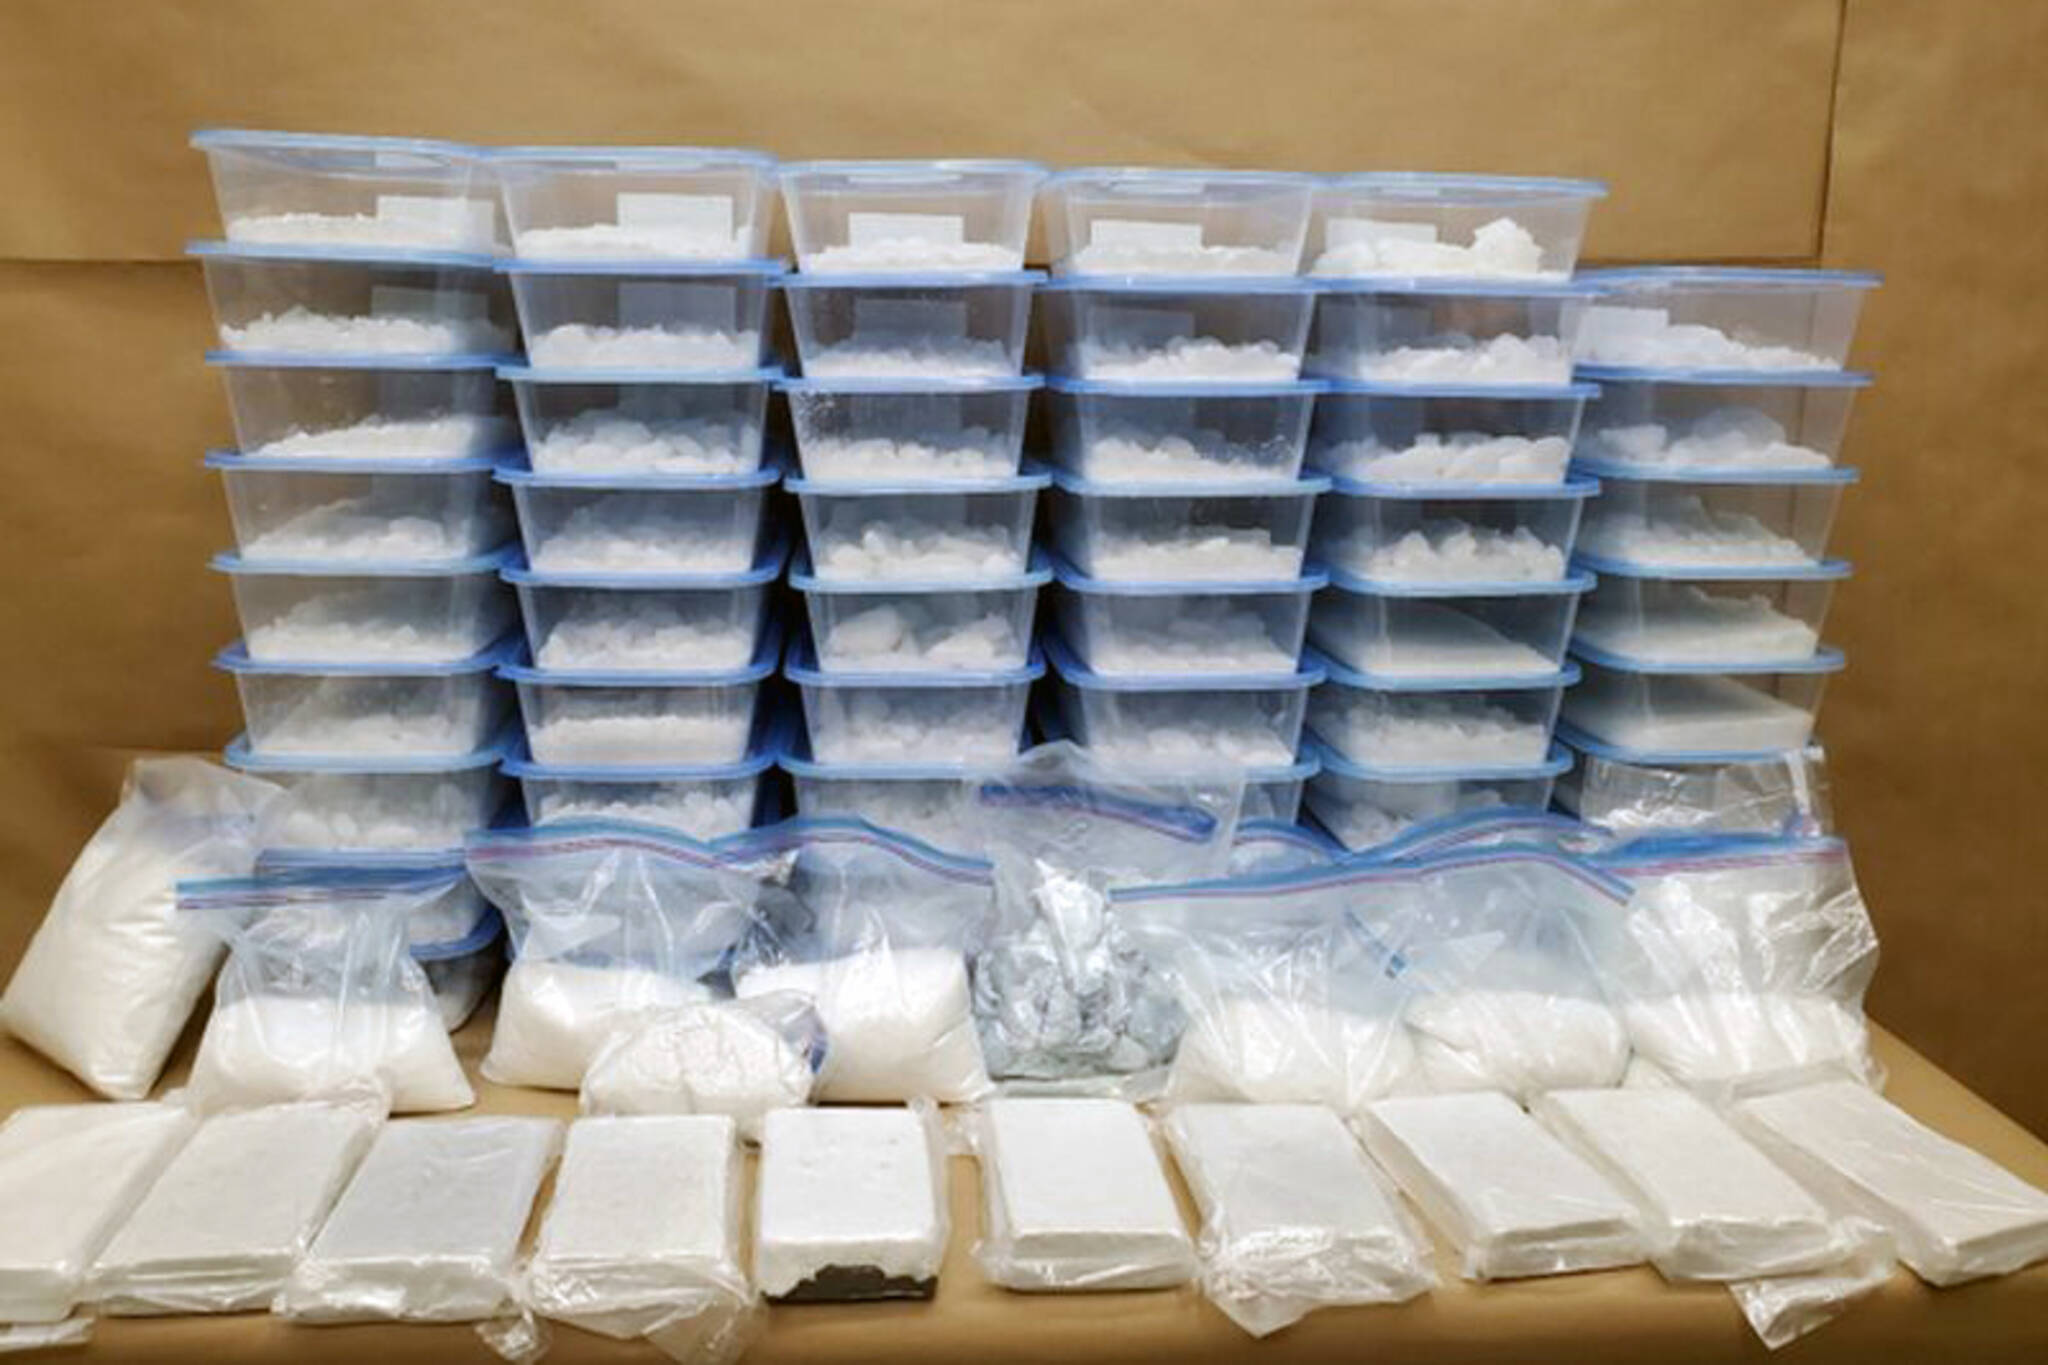 Massive Toronto bust nets 17M worth of cocaine and other drugs